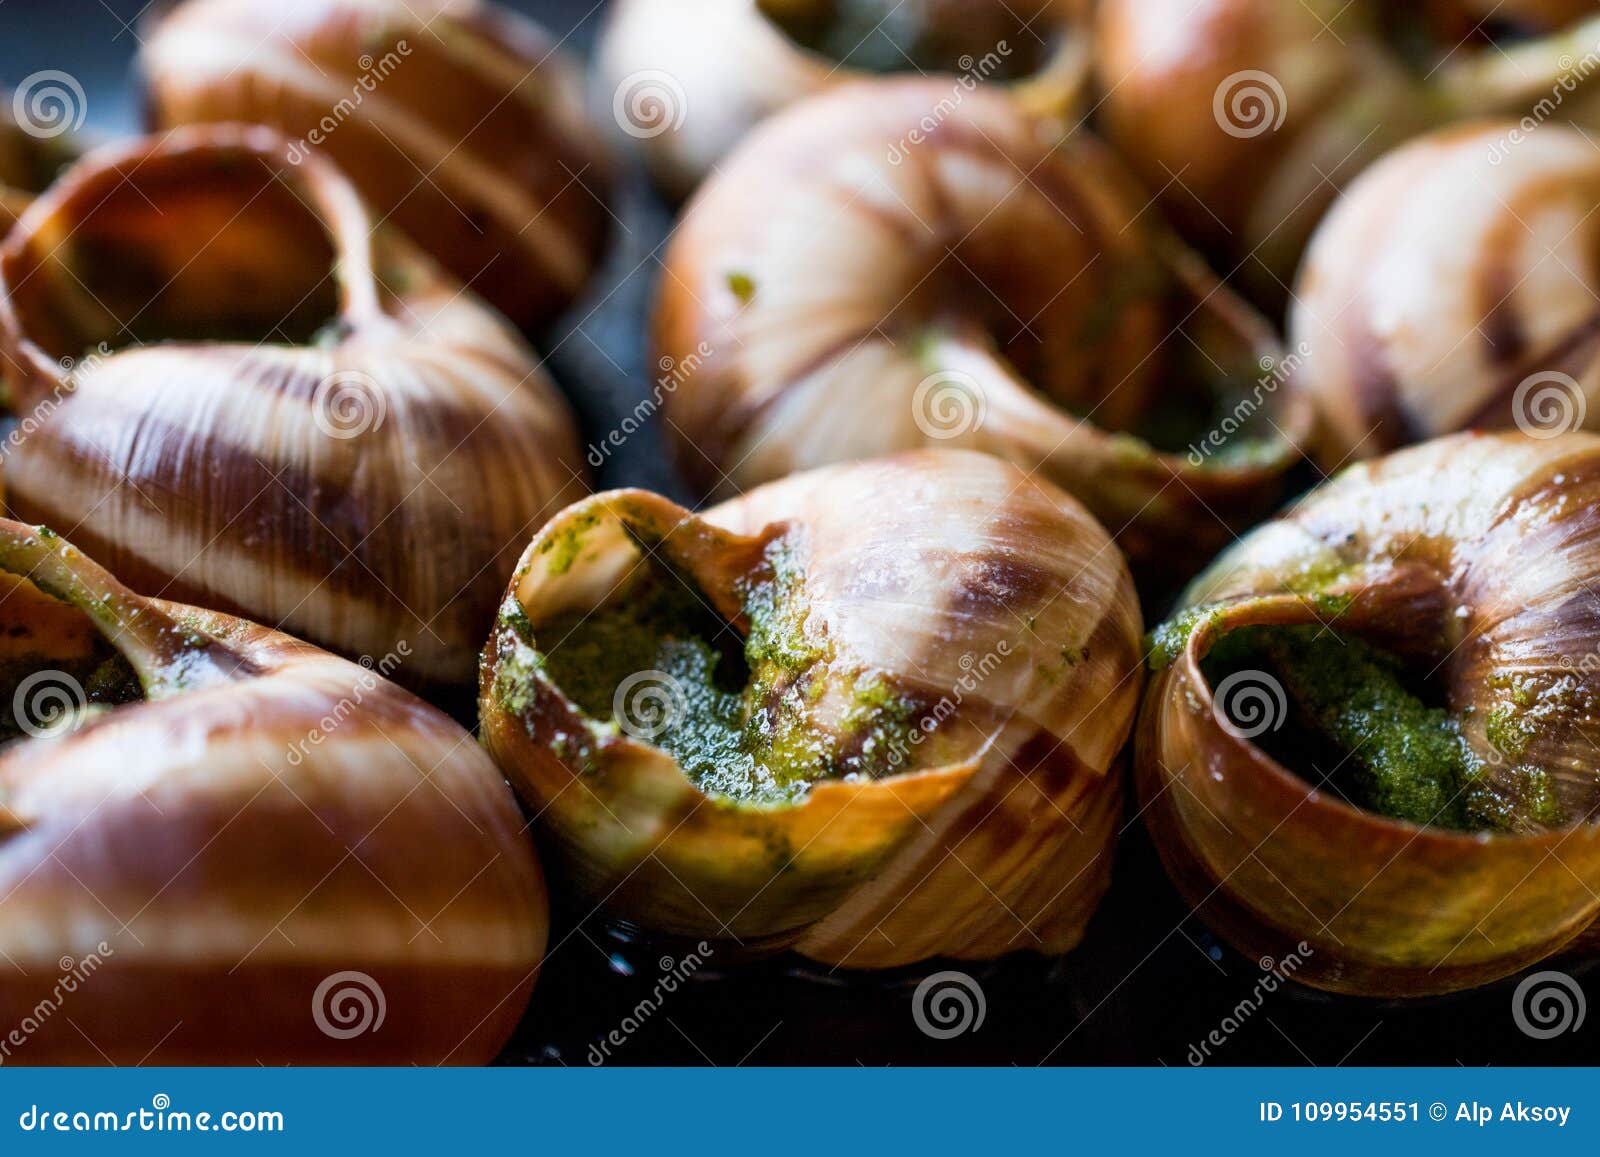 Escargots De Bourgogne - Snail Food with Herbs Butter, France Gourmet Dish.  Stock Image - Image of closeup, lunch: 109954551